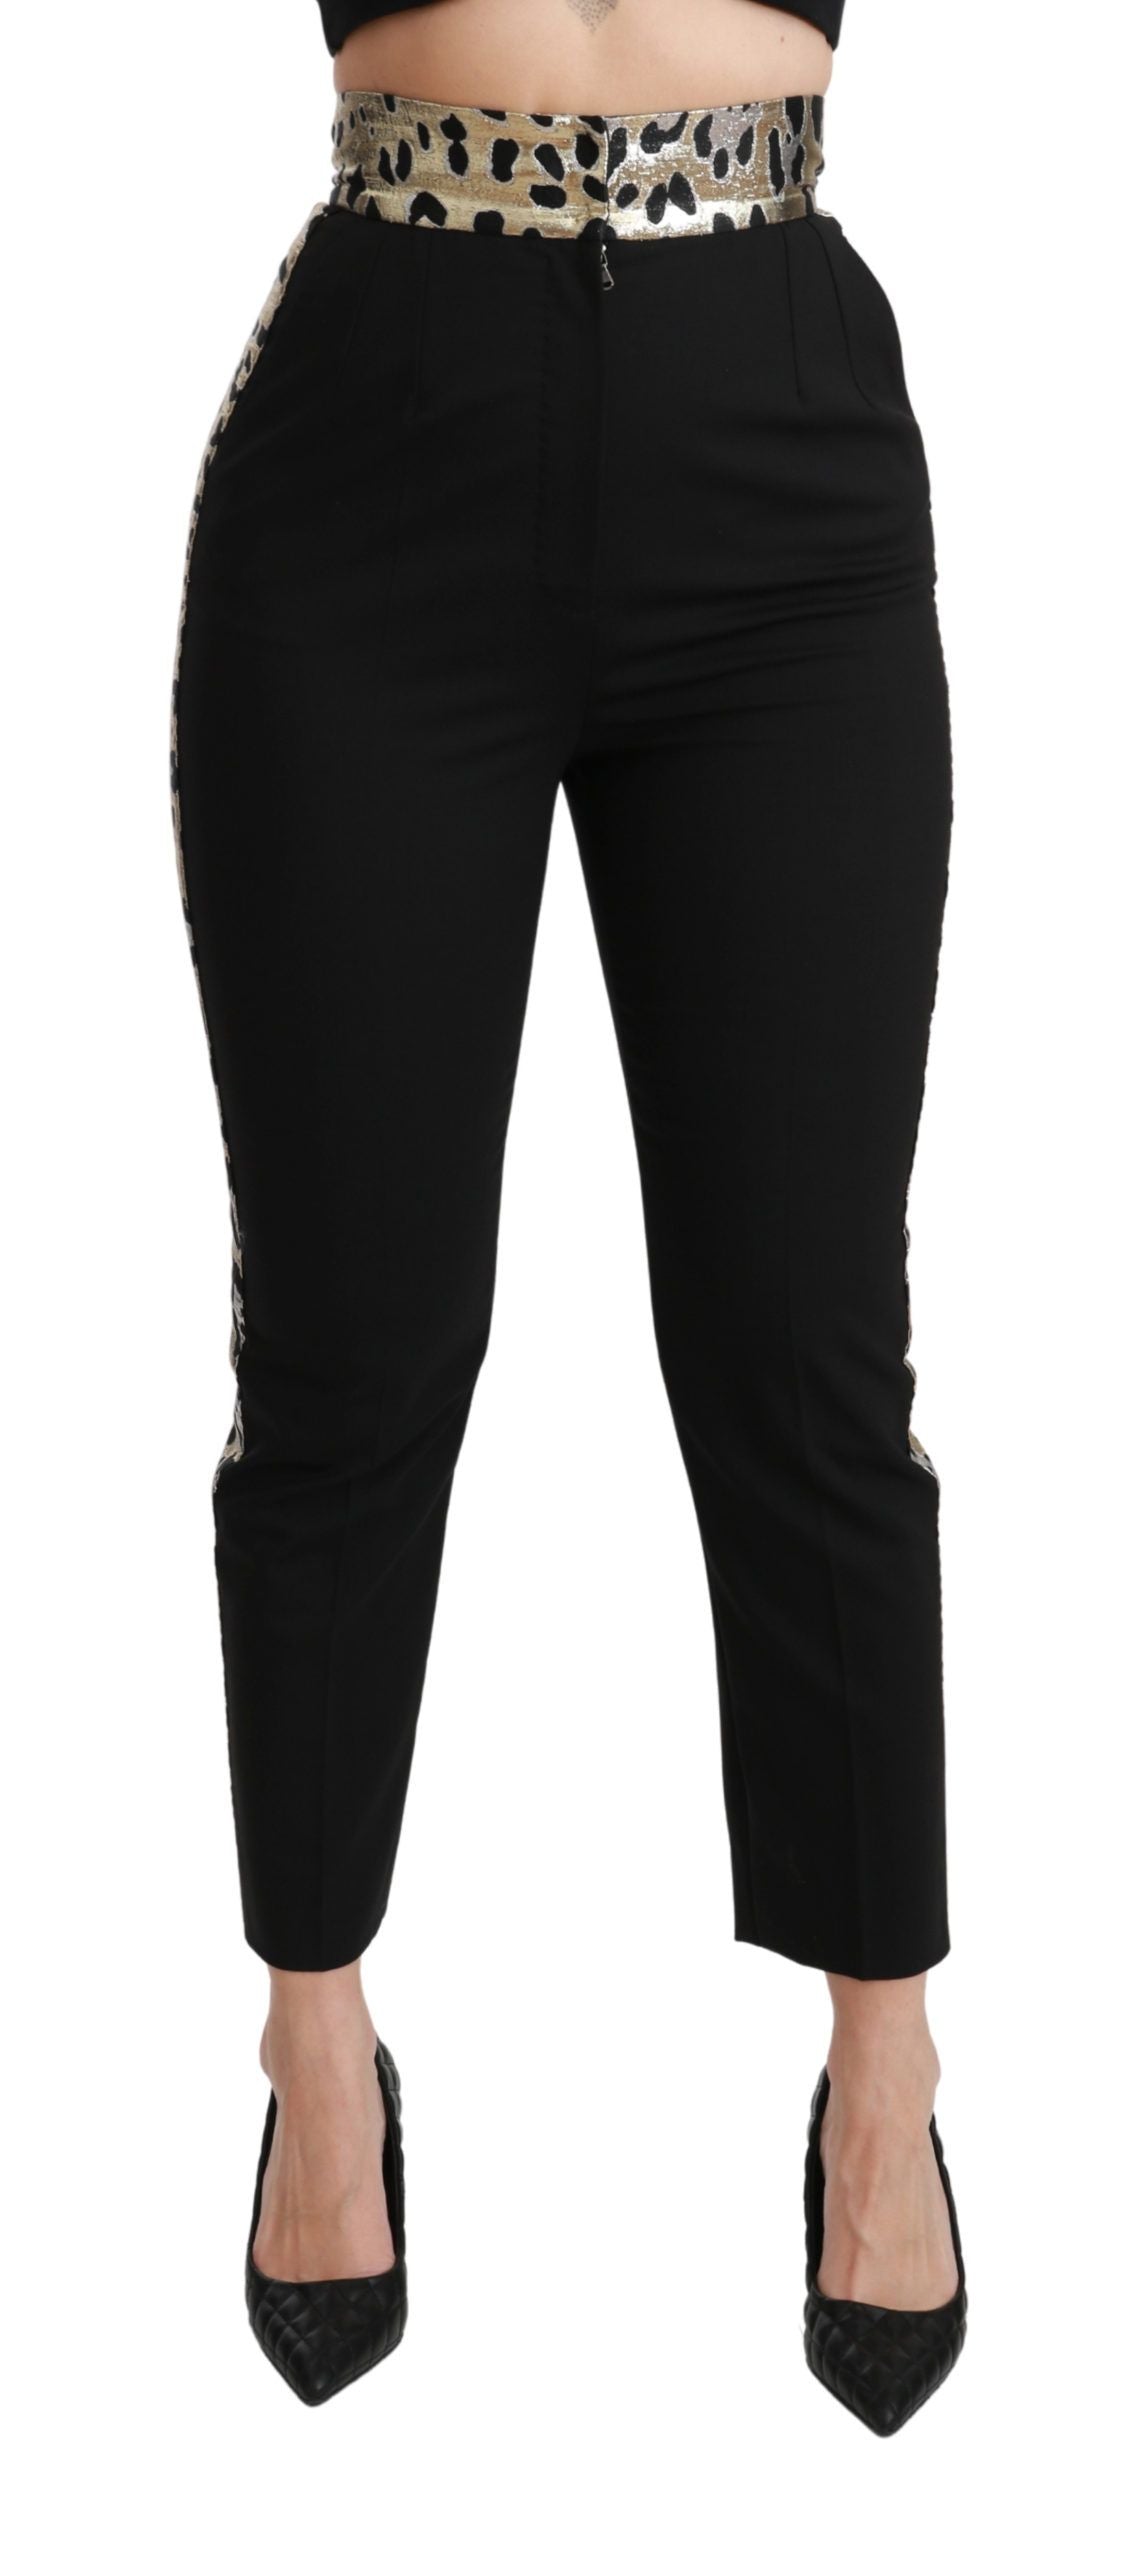 Buy Women's Long Wool High Waisted Trousers Online